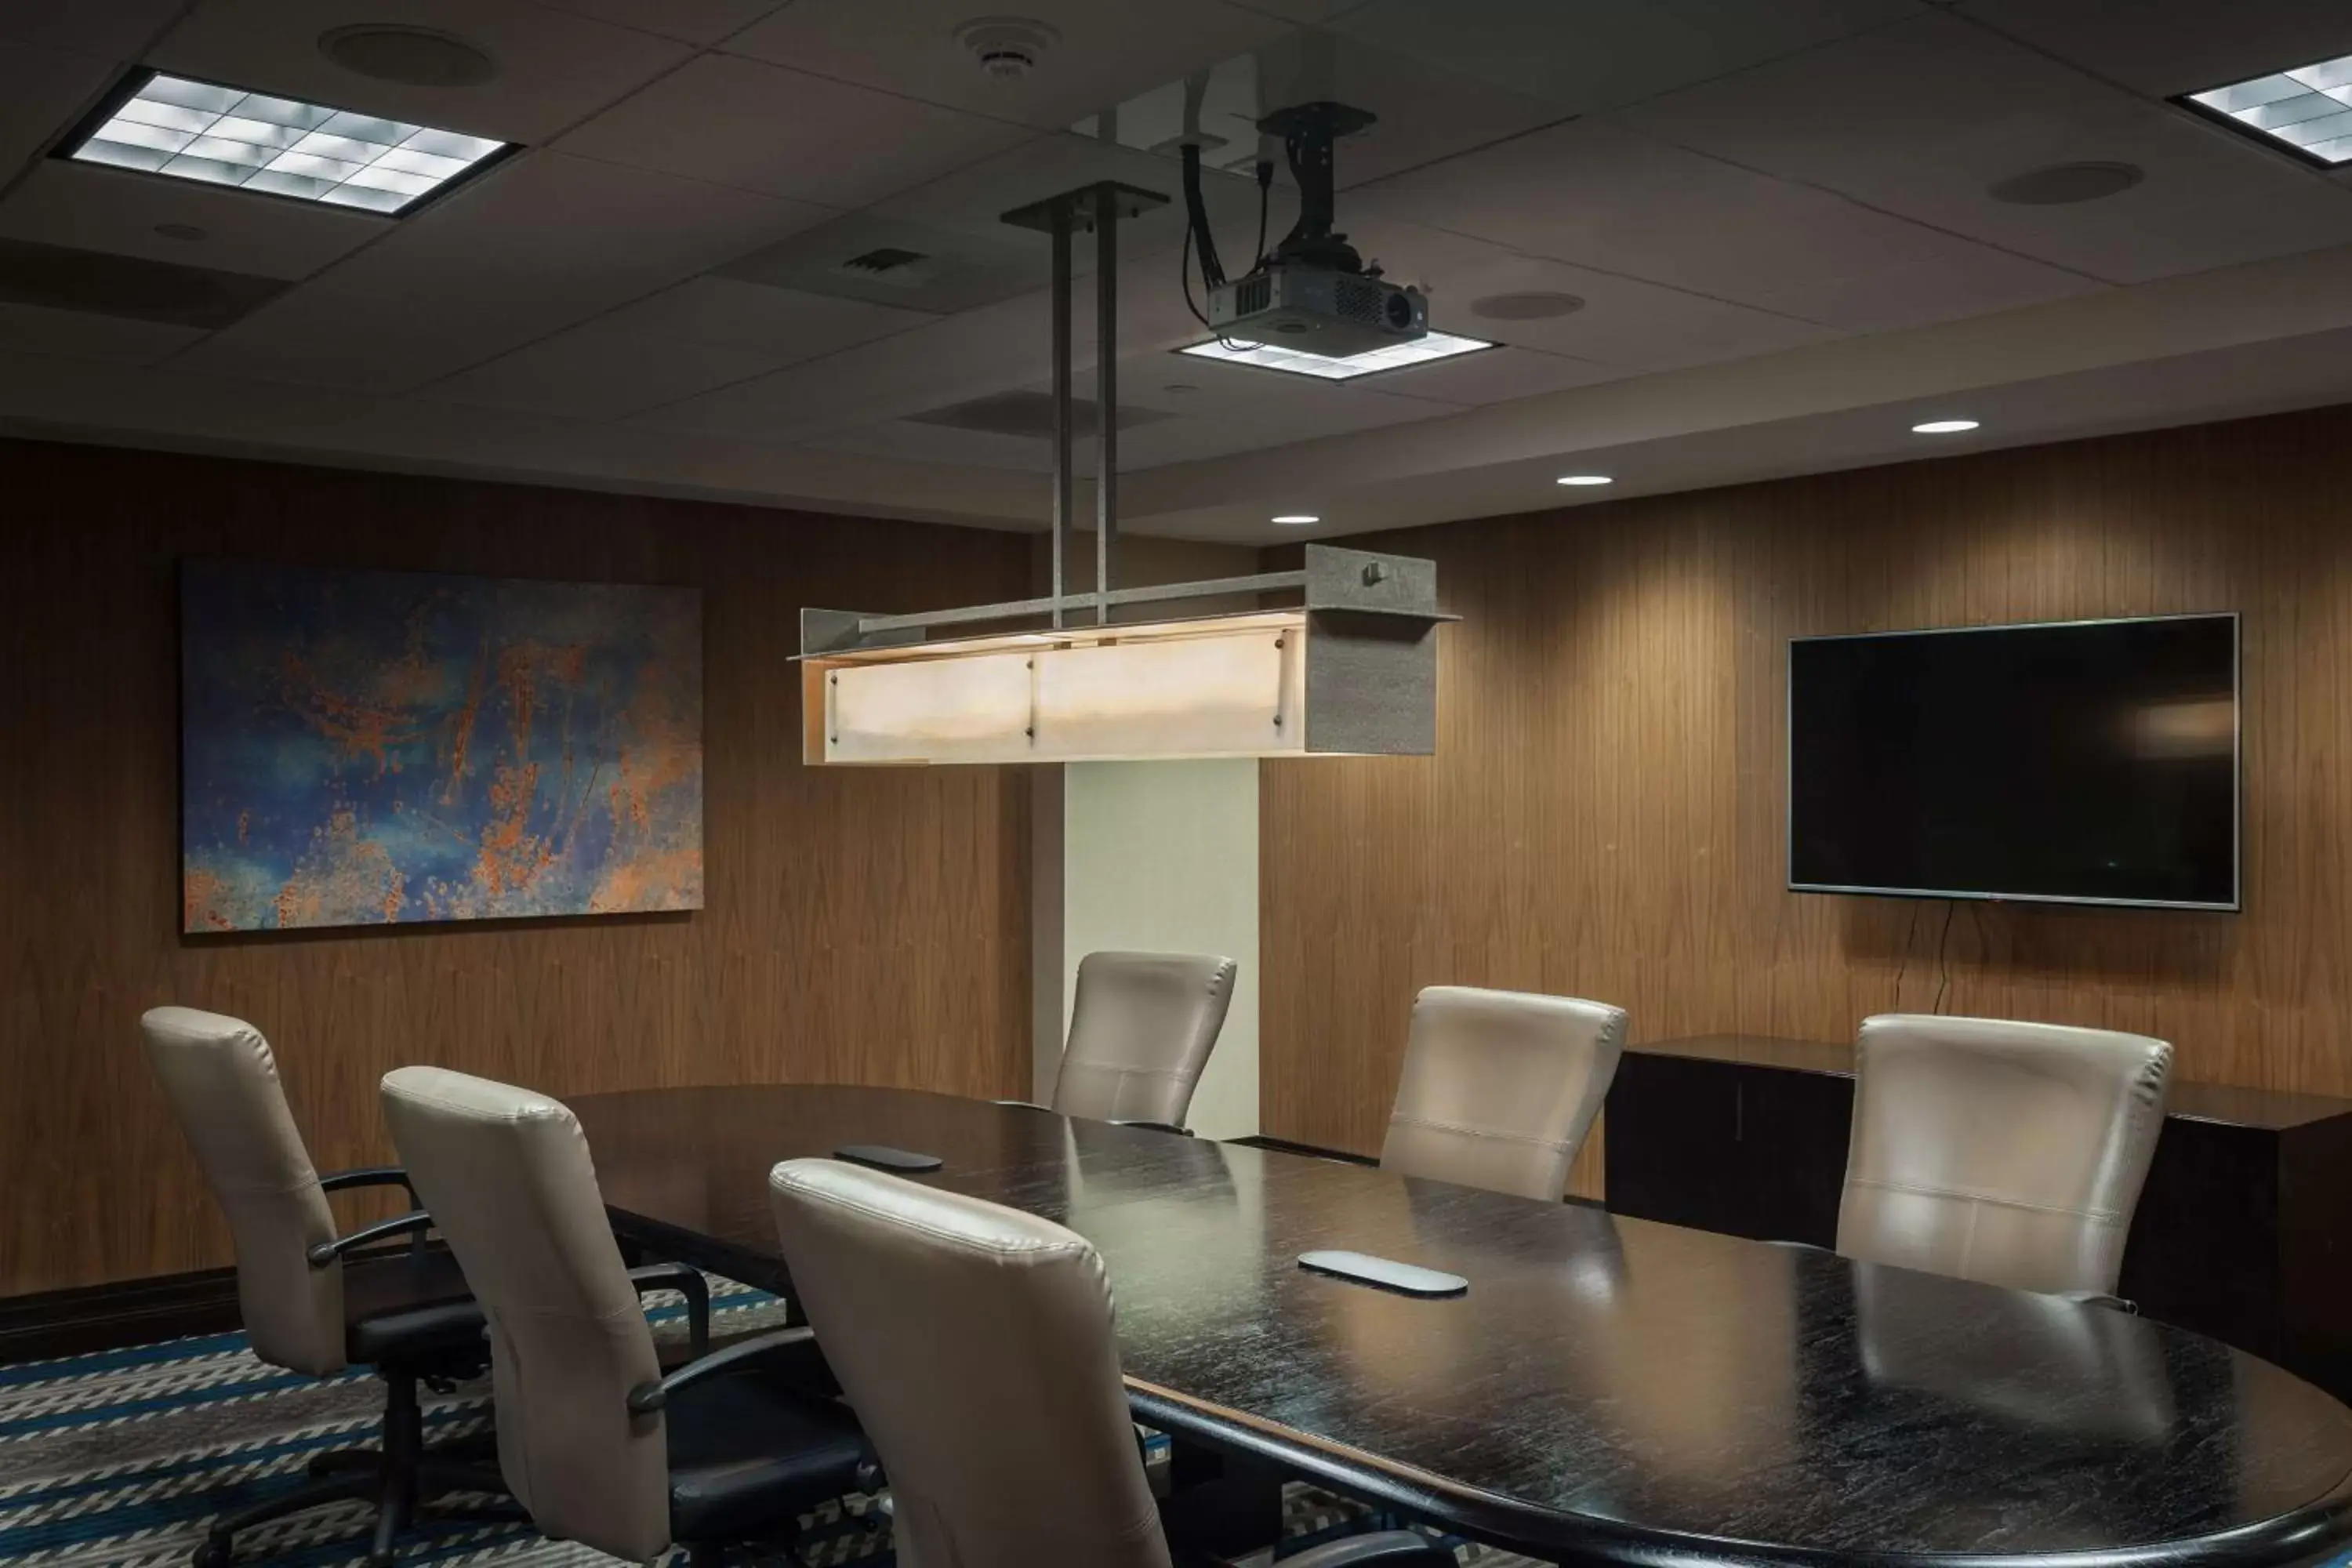 Meeting/conference room in Doubletree By Hilton Billings